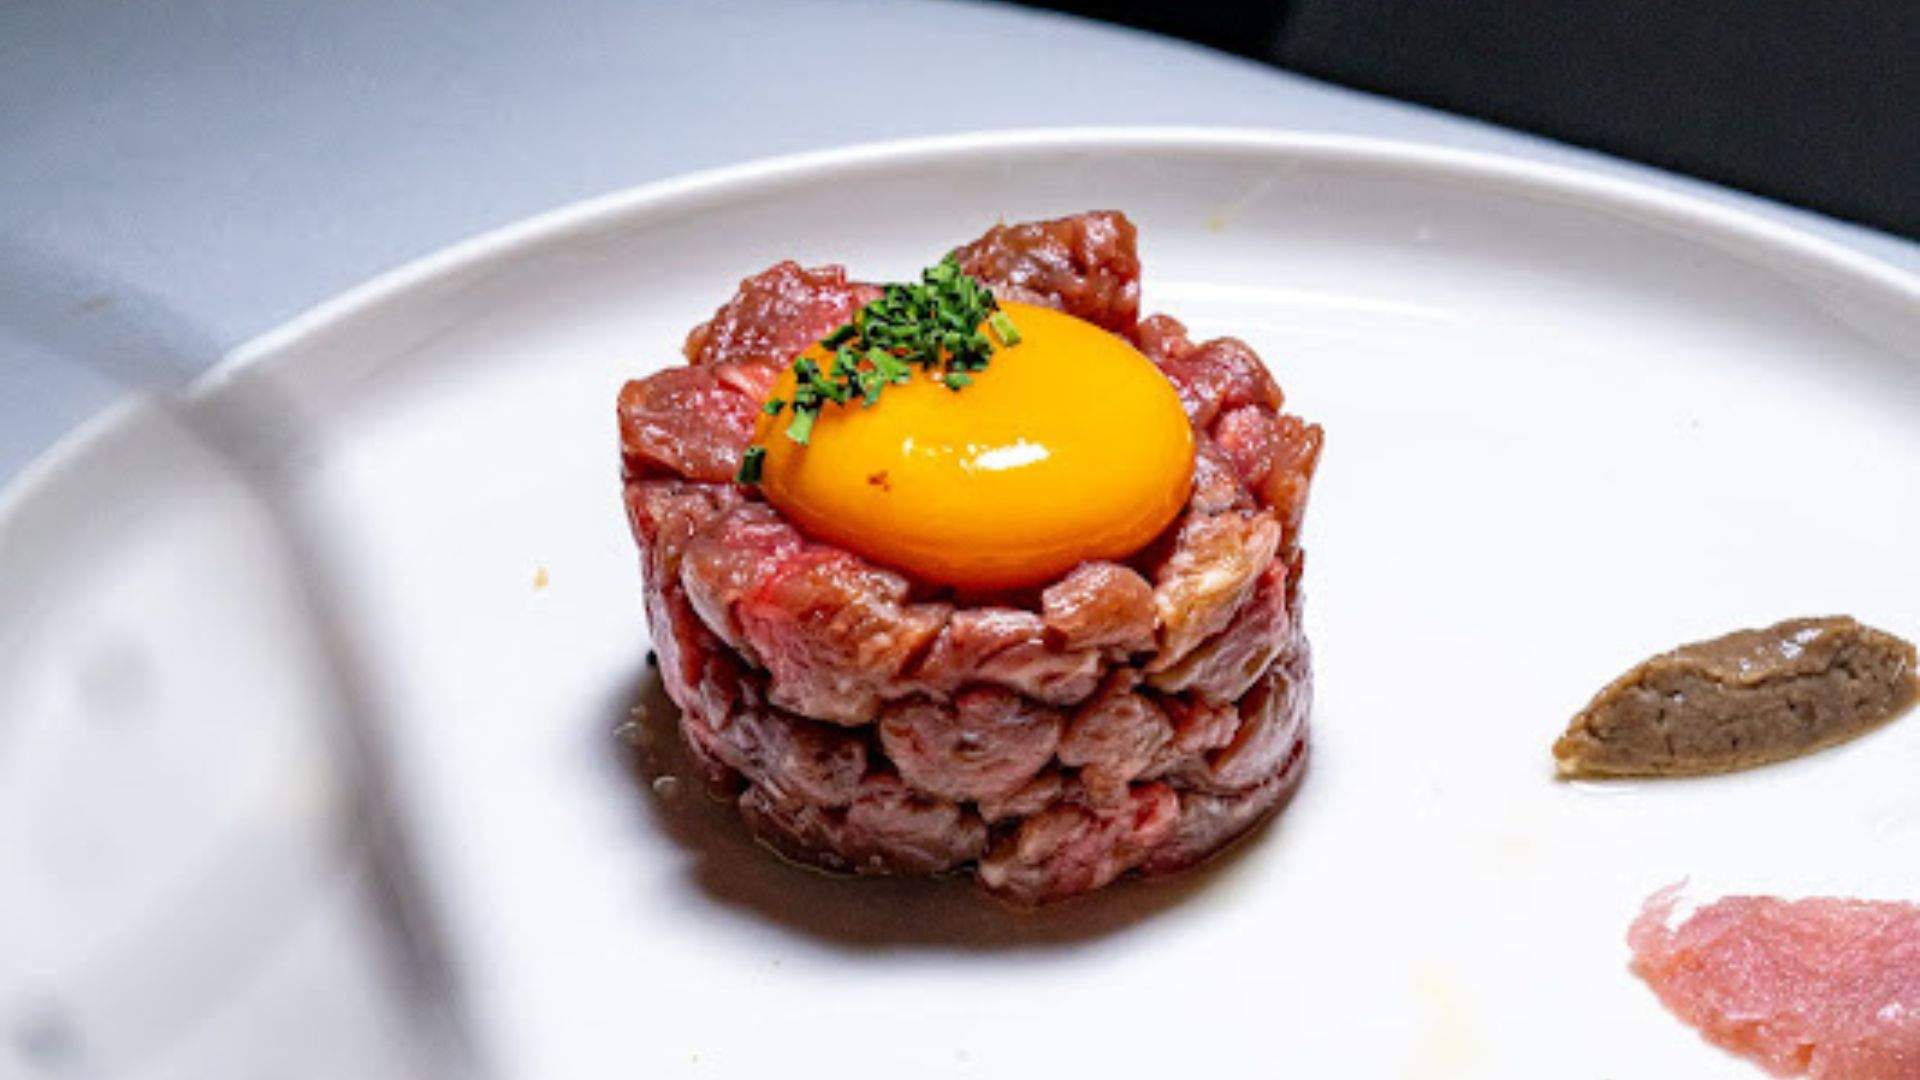 Macleay St Bistro new location with it's OG food: classic steak tartare.